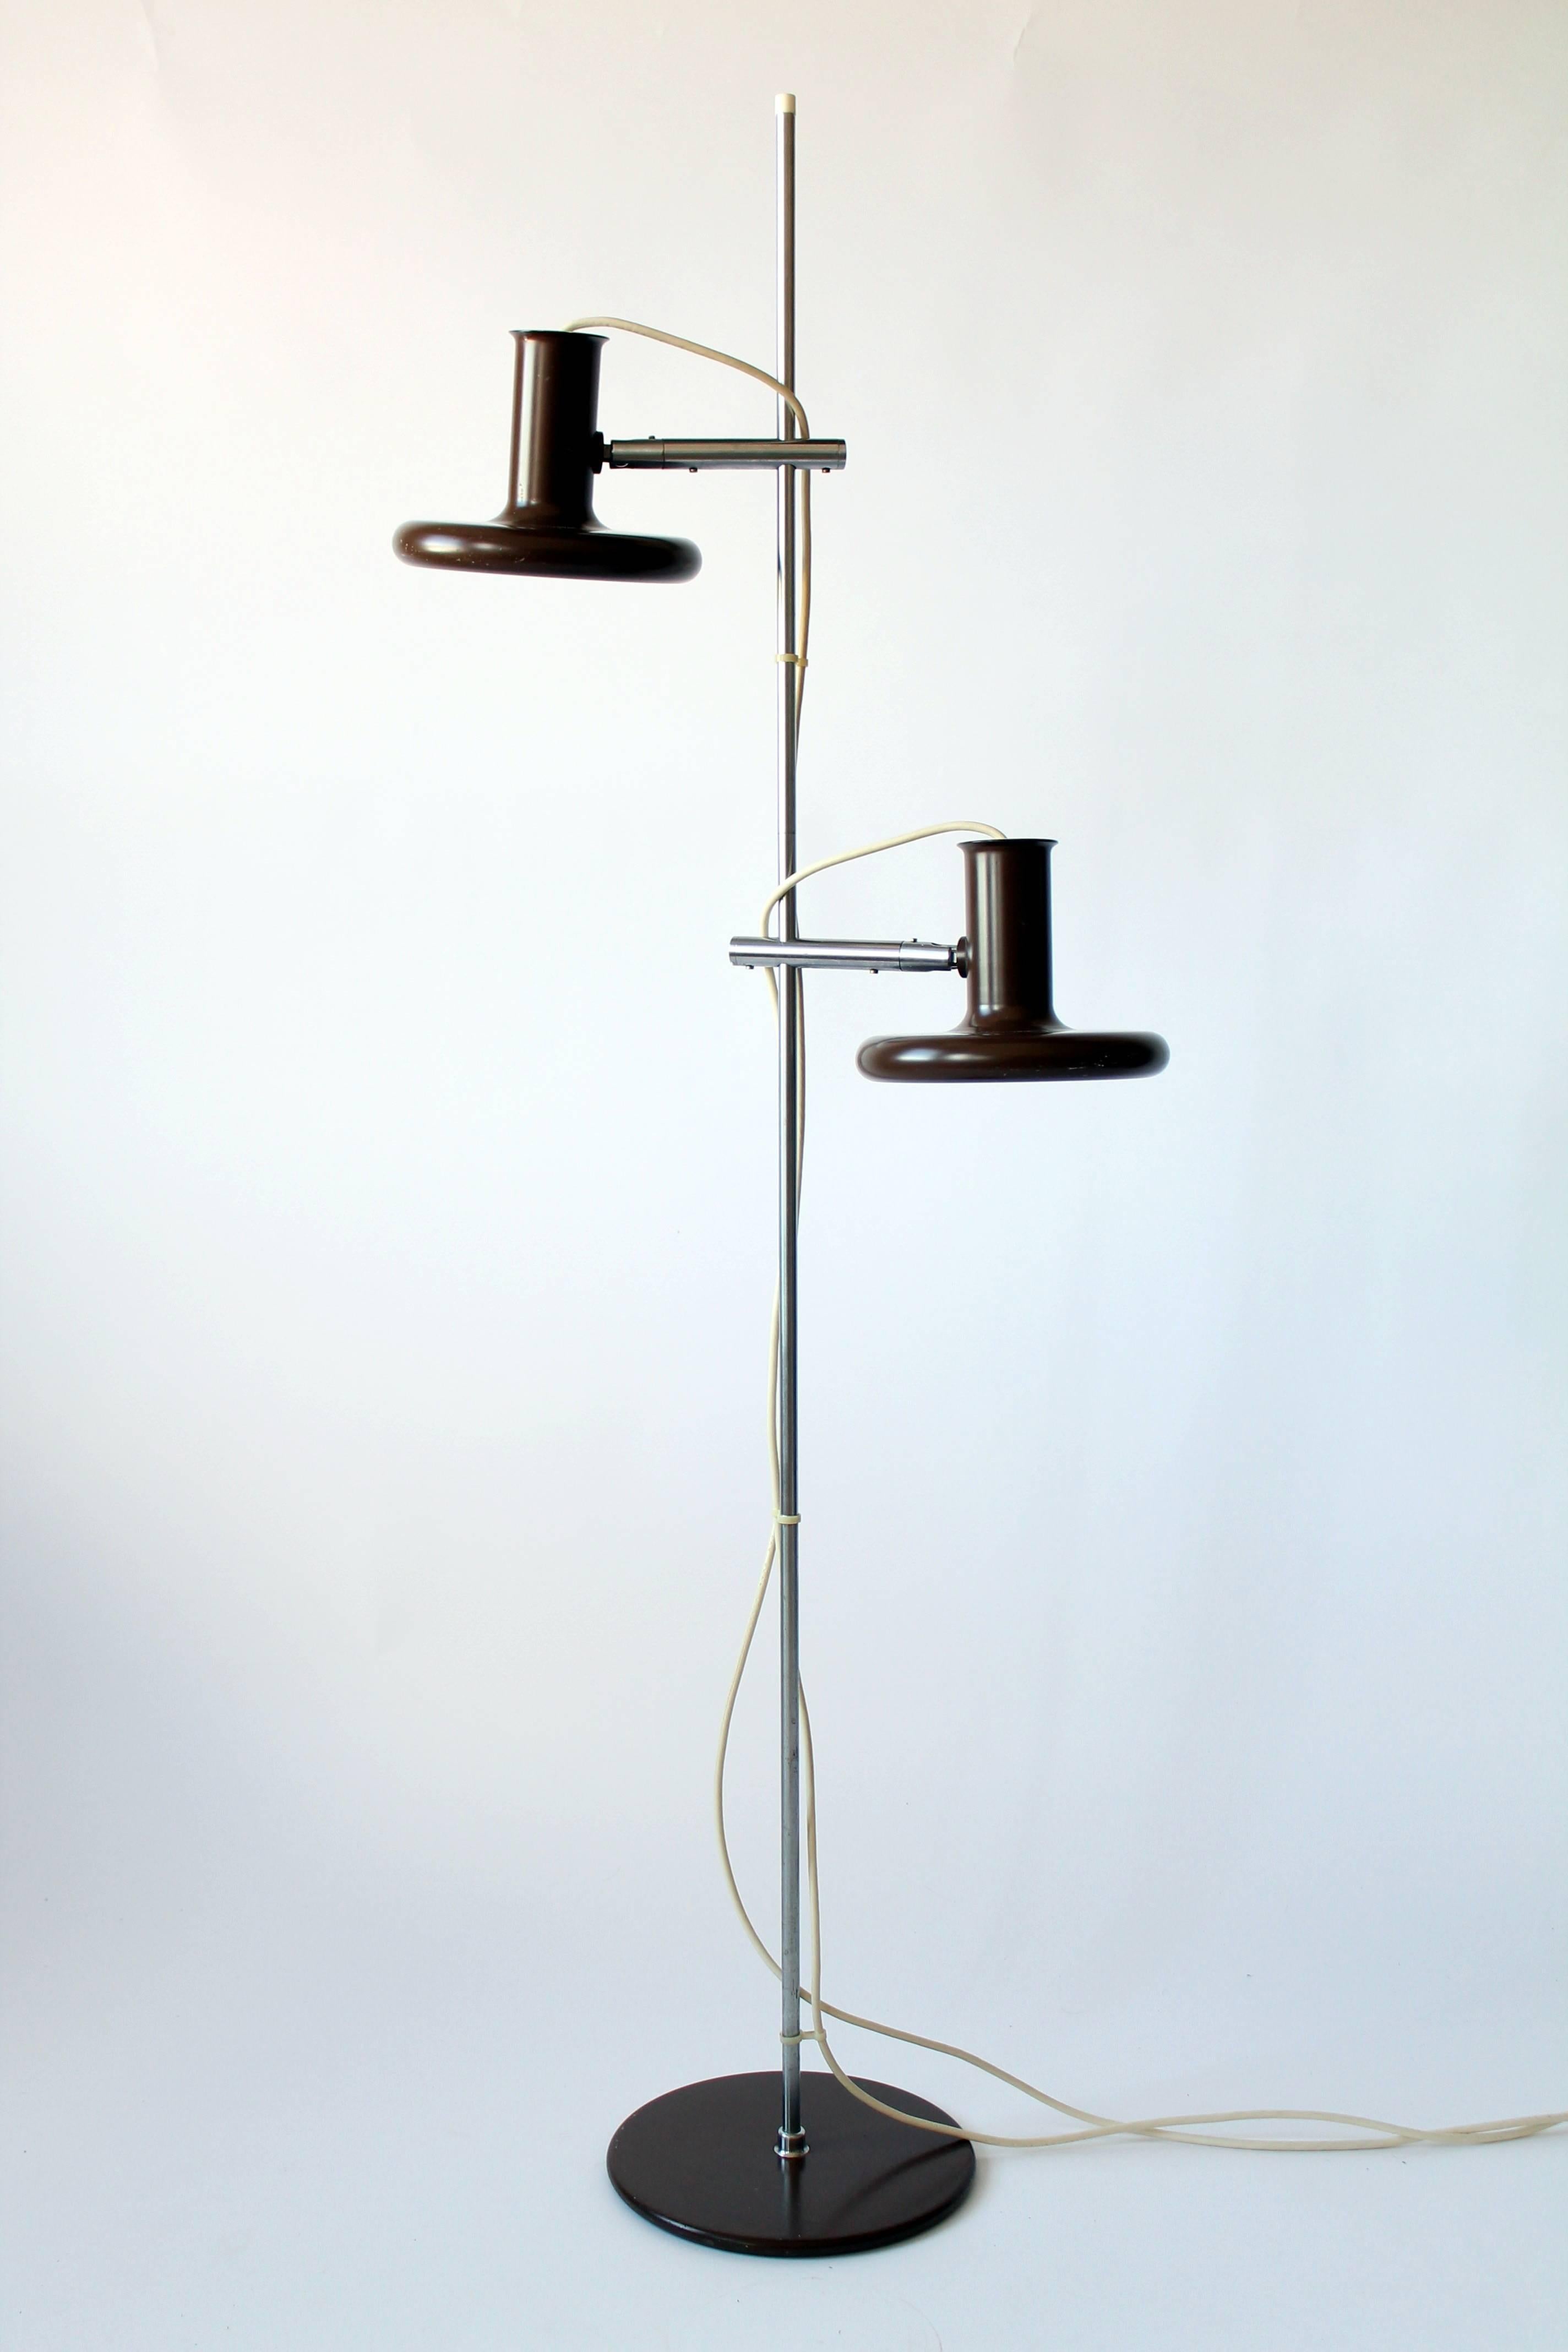 Danish iconic Minimalist floor lamp in a dark chocolate brown tone.

Shades slide up and down anywhere on chrome pole and pivot in all direction.

Well made and sturdy hardware.

Height is 56 inches, base of lamp is 10 inches wide.

Ceramic